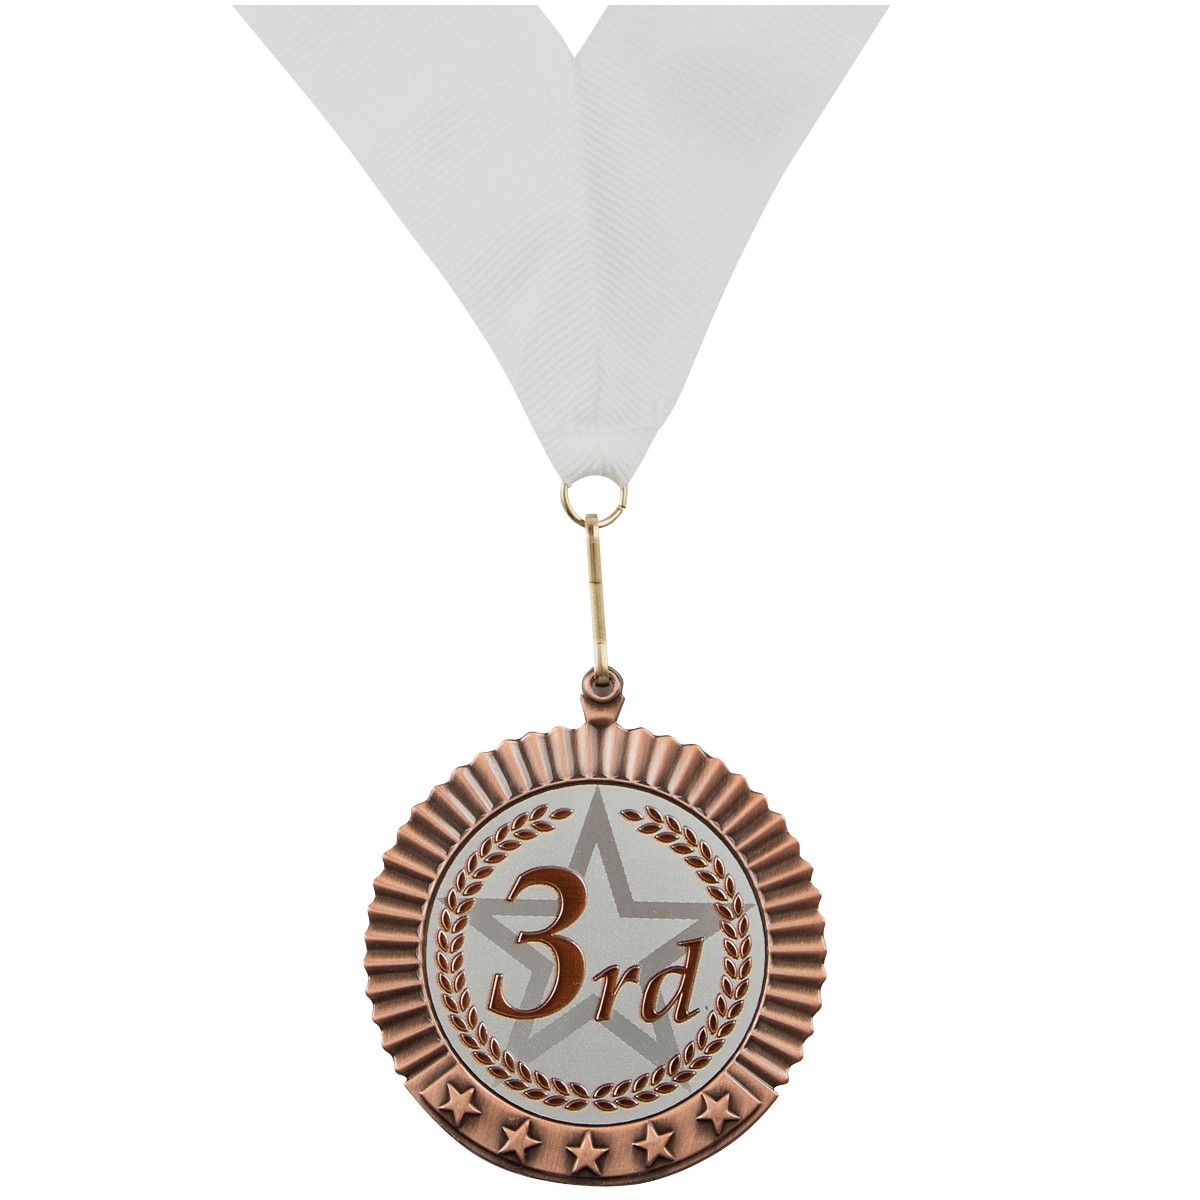 BASKETBALL 2" dia medal silver with navy blue/white neck ribbon 